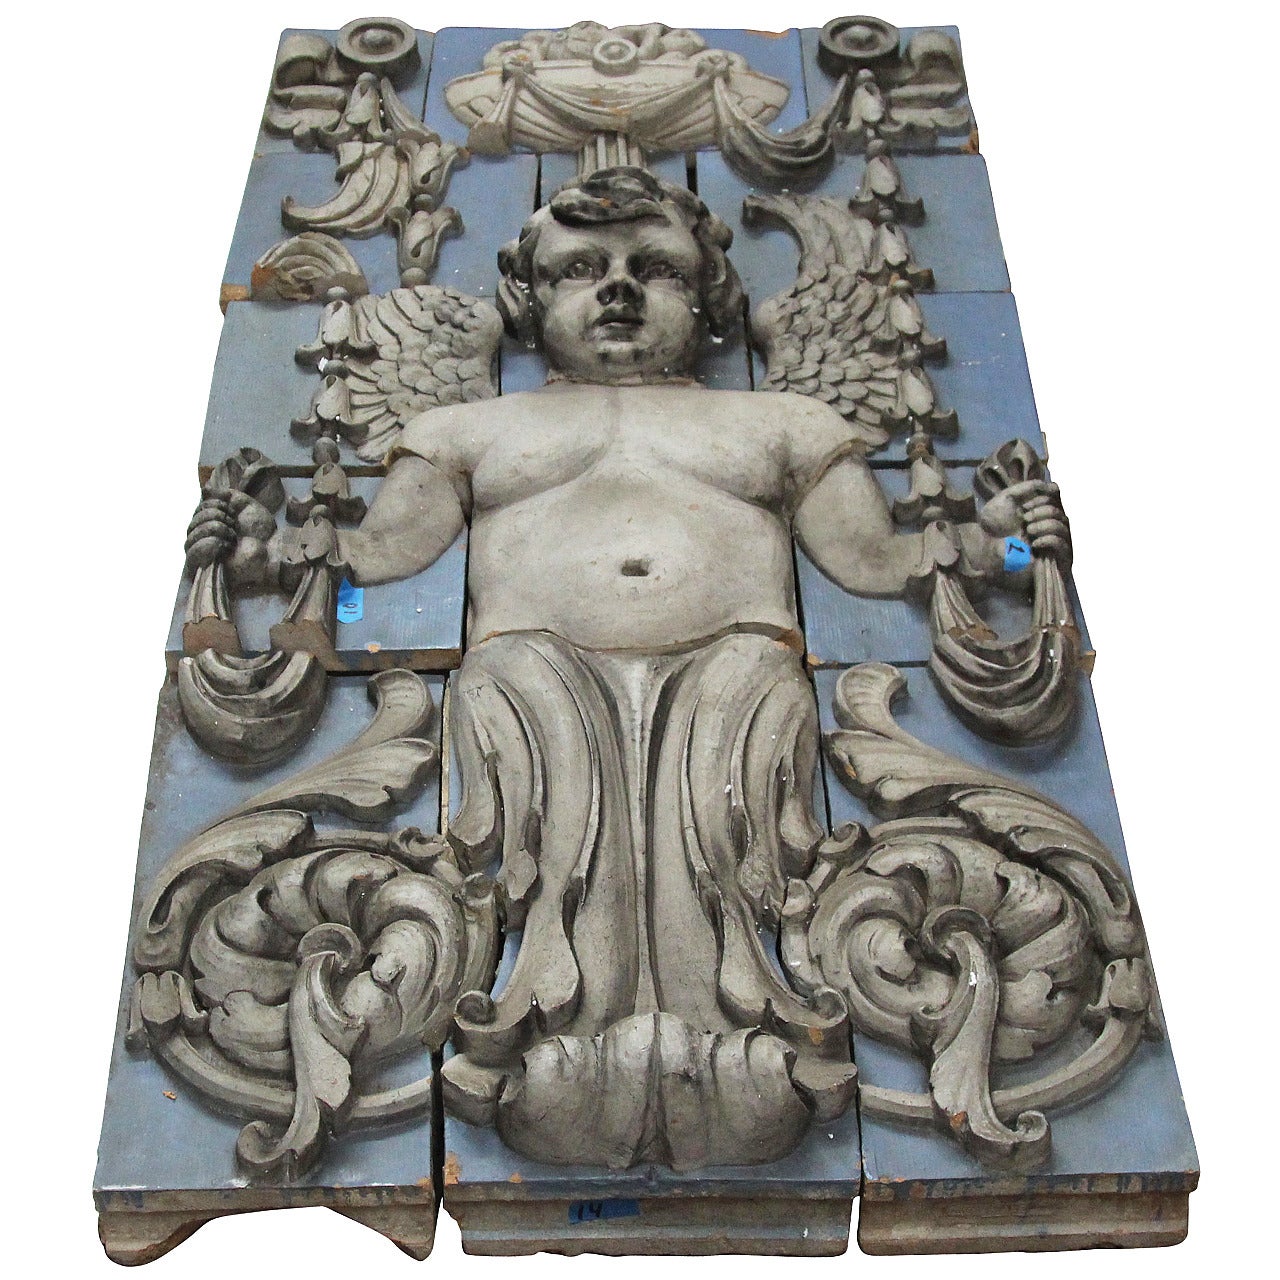 1918 Polychrome Terracotta Cherub Frieze from the Southern Hotel in Baltimore